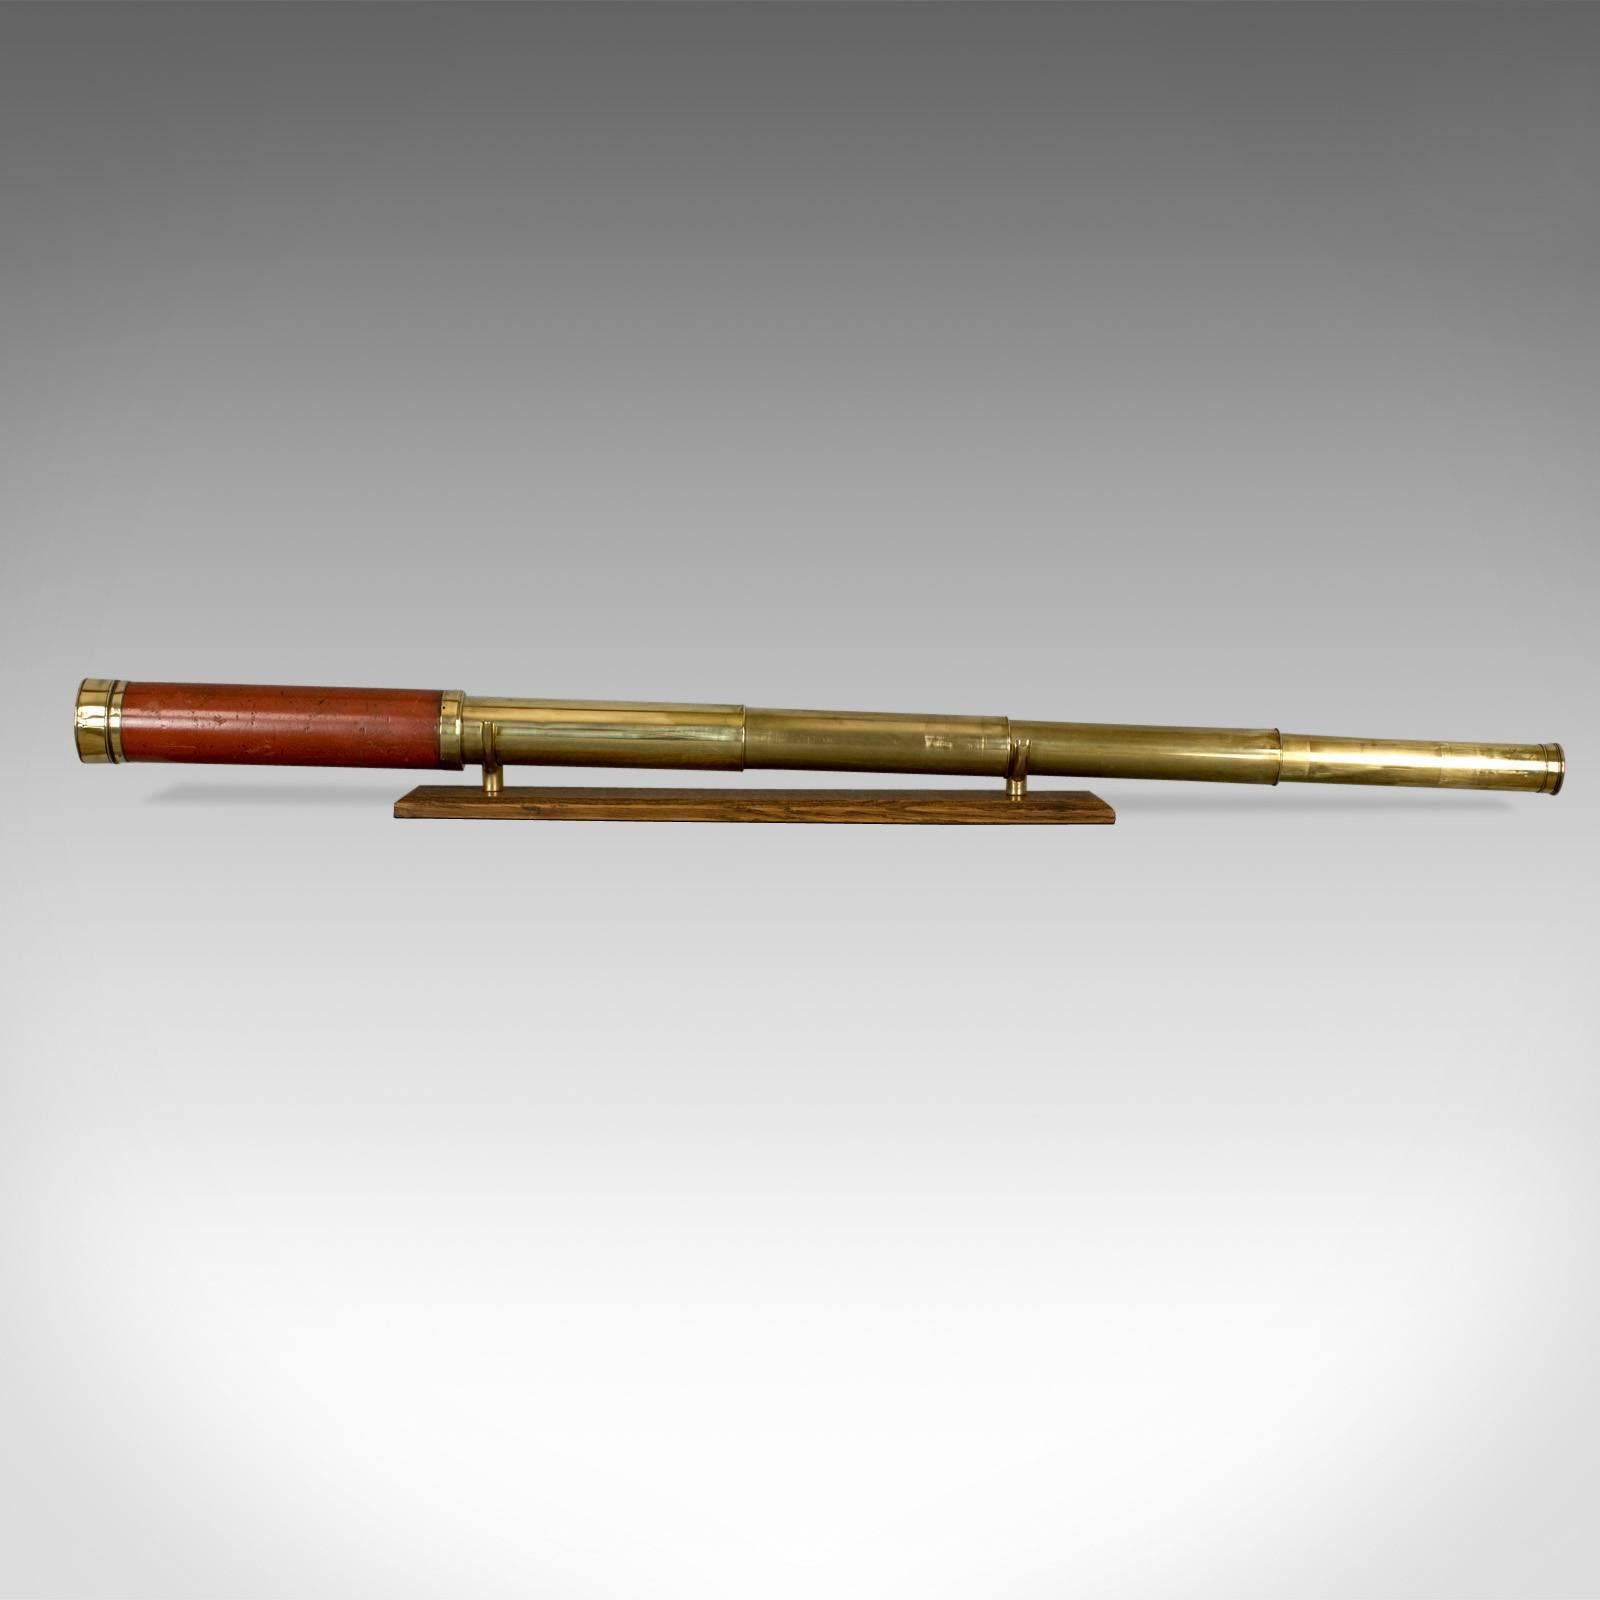 This is an antique telescope by Dollond dating to the early 19th century, a four-draw Scope suitable for terrestrial or astronomical use, circa 1800.

Perfect for bird watching, landscape appreciation, wildlife, or maritime observation. Equally